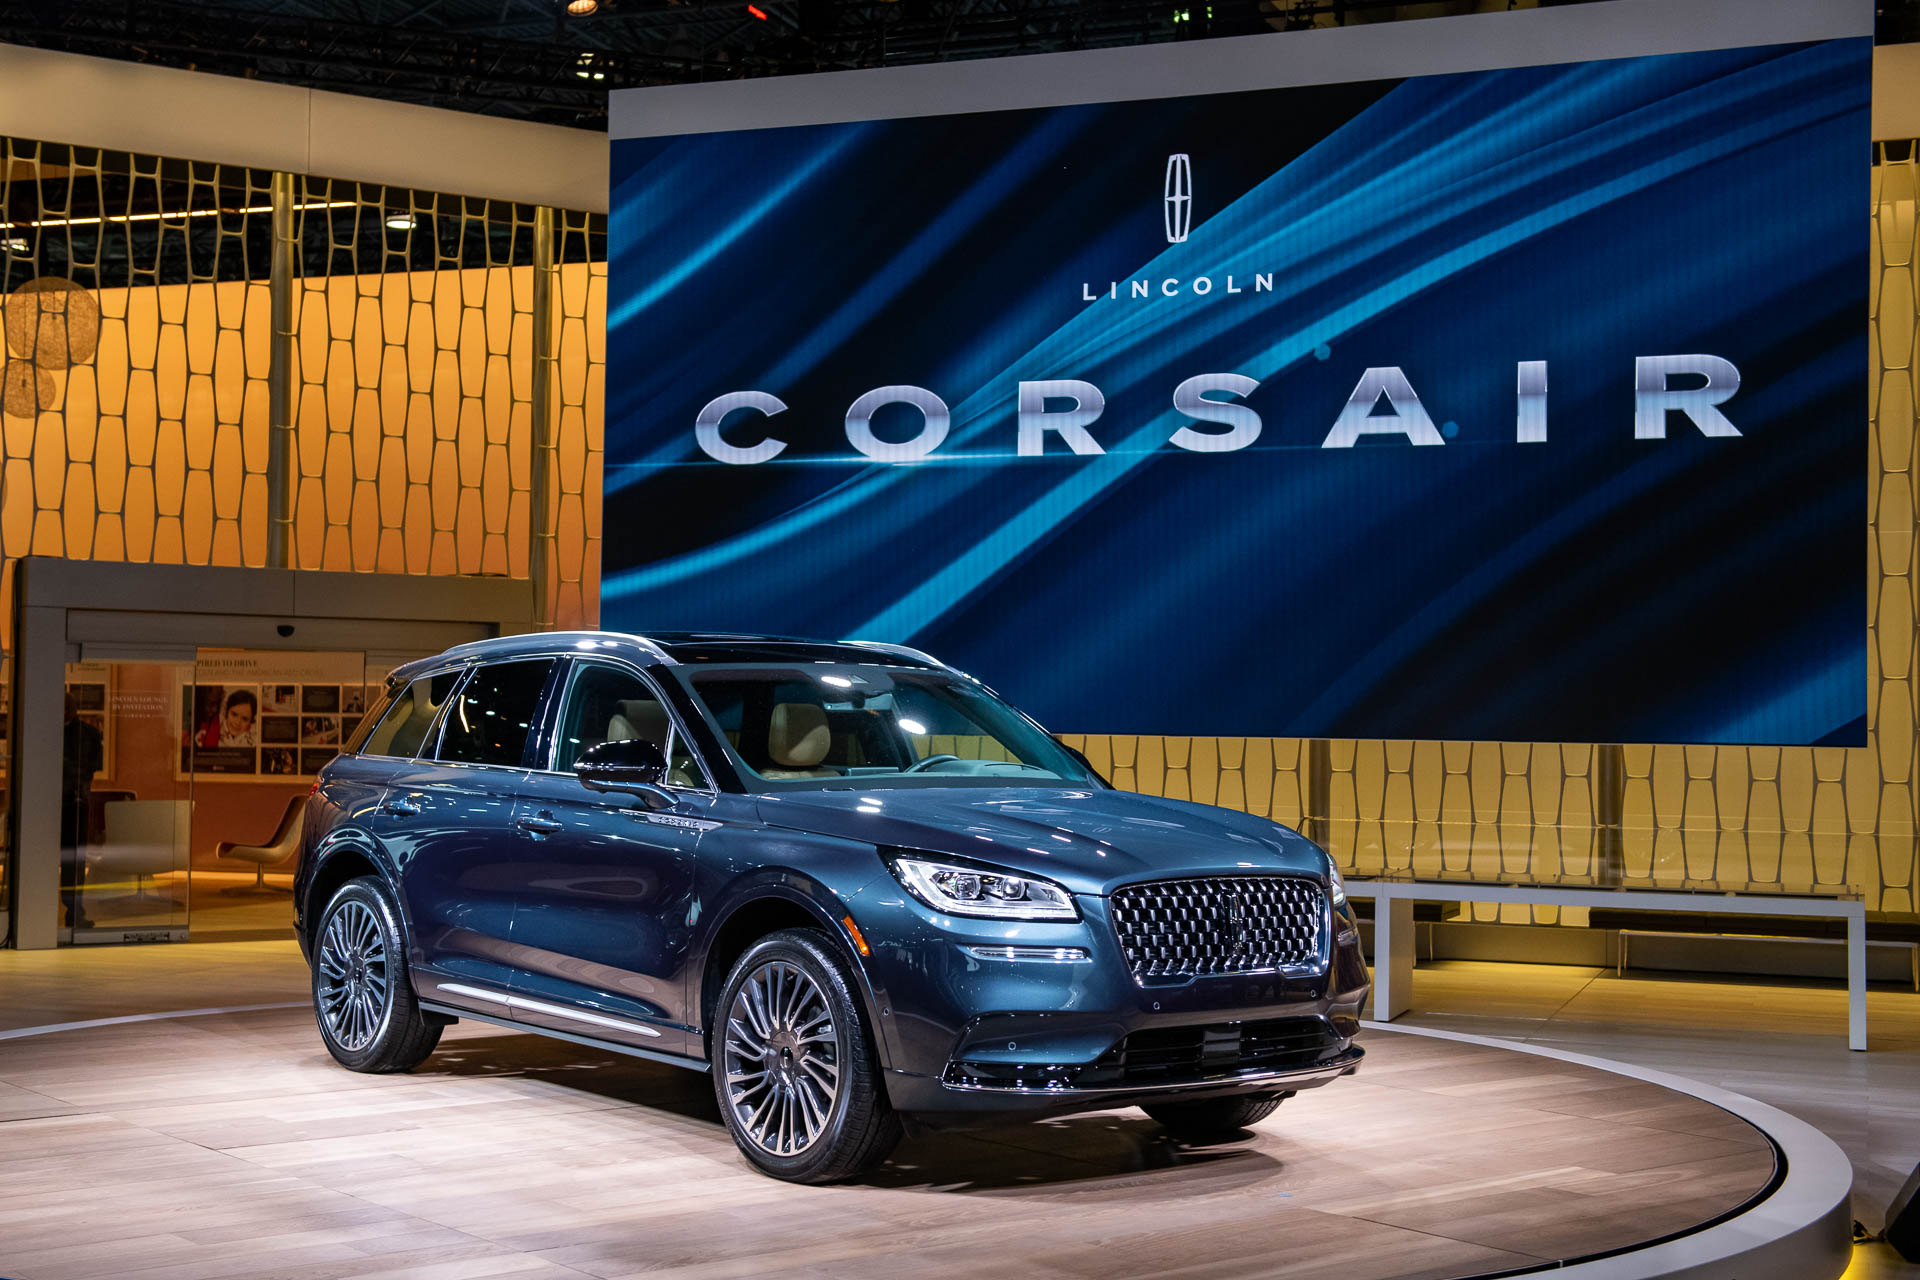 2020 Lincoln Corsair debuts in New York as the MKC replacement